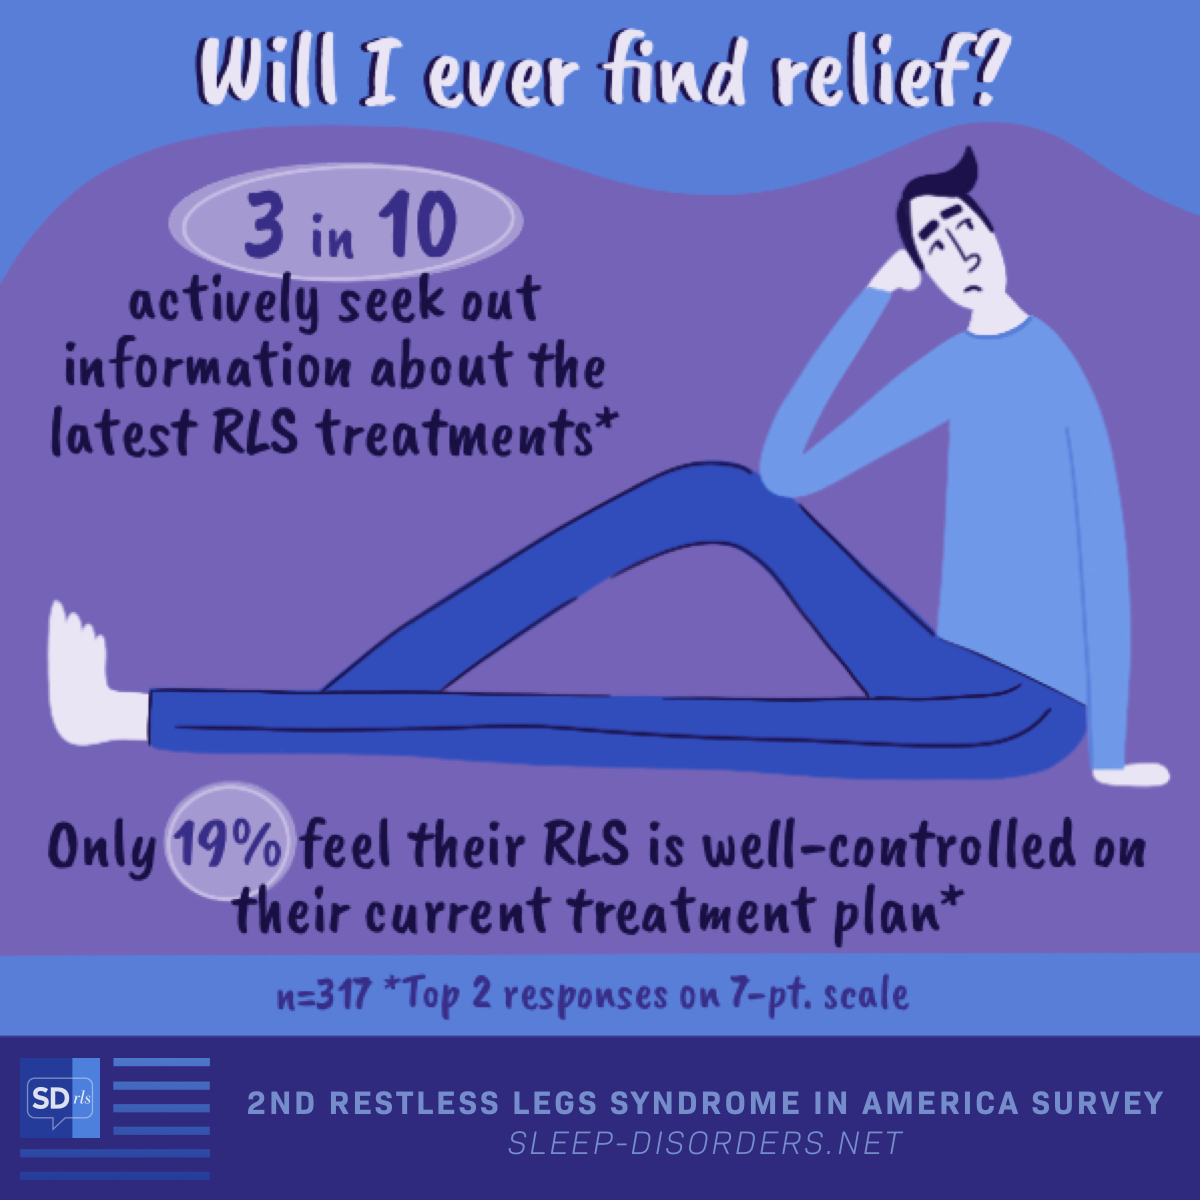 According to the 2nd Sleep Disorders In America survey, 3 in 10 actively seek out information about the latest RLS treatments and only 19% feel well-controlled on current treatment.